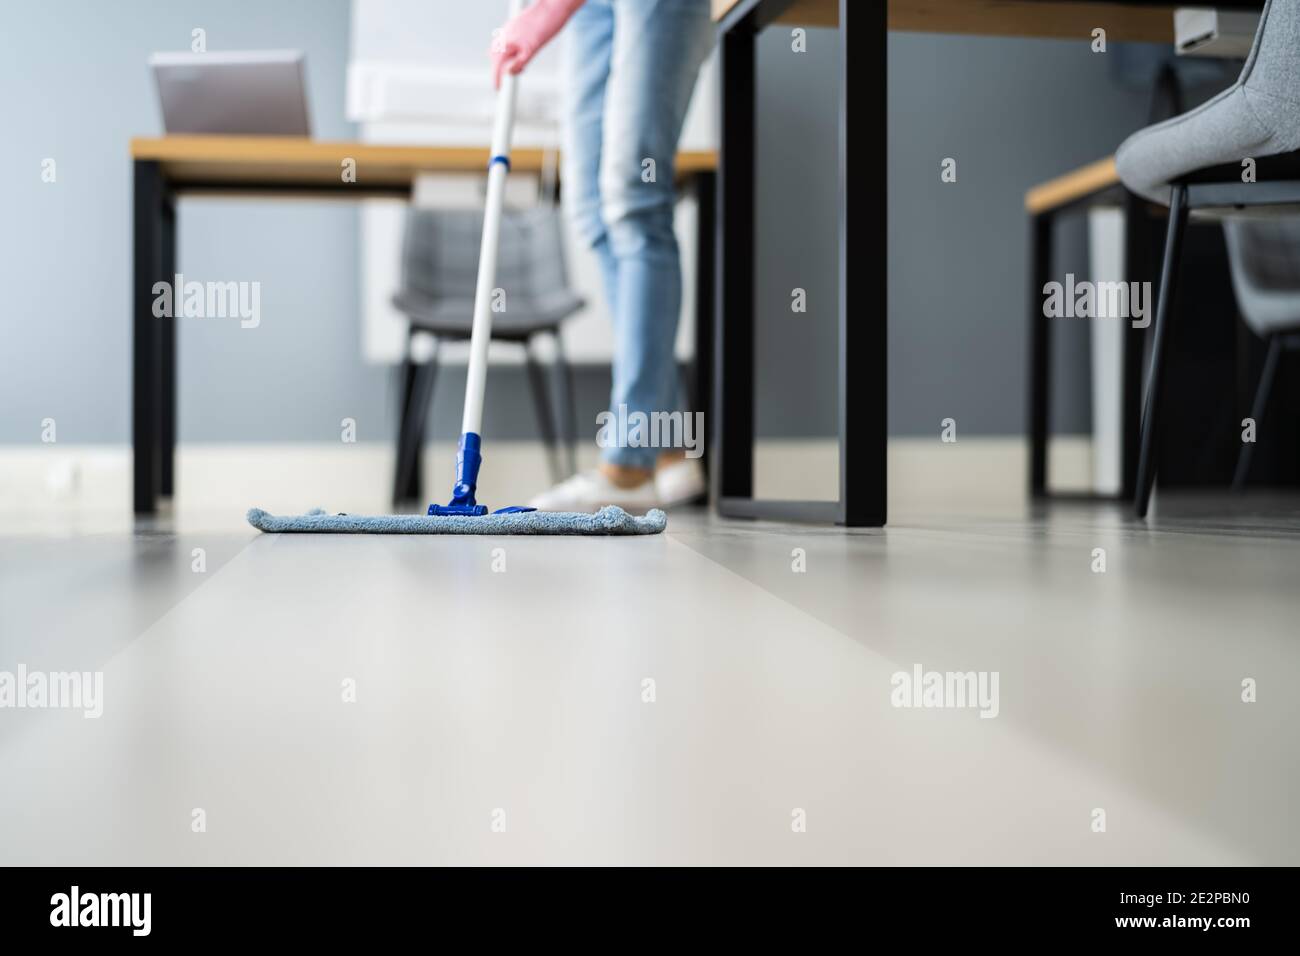 Female Janitor Mopping Floor In Office Or Workplace Stock Photo